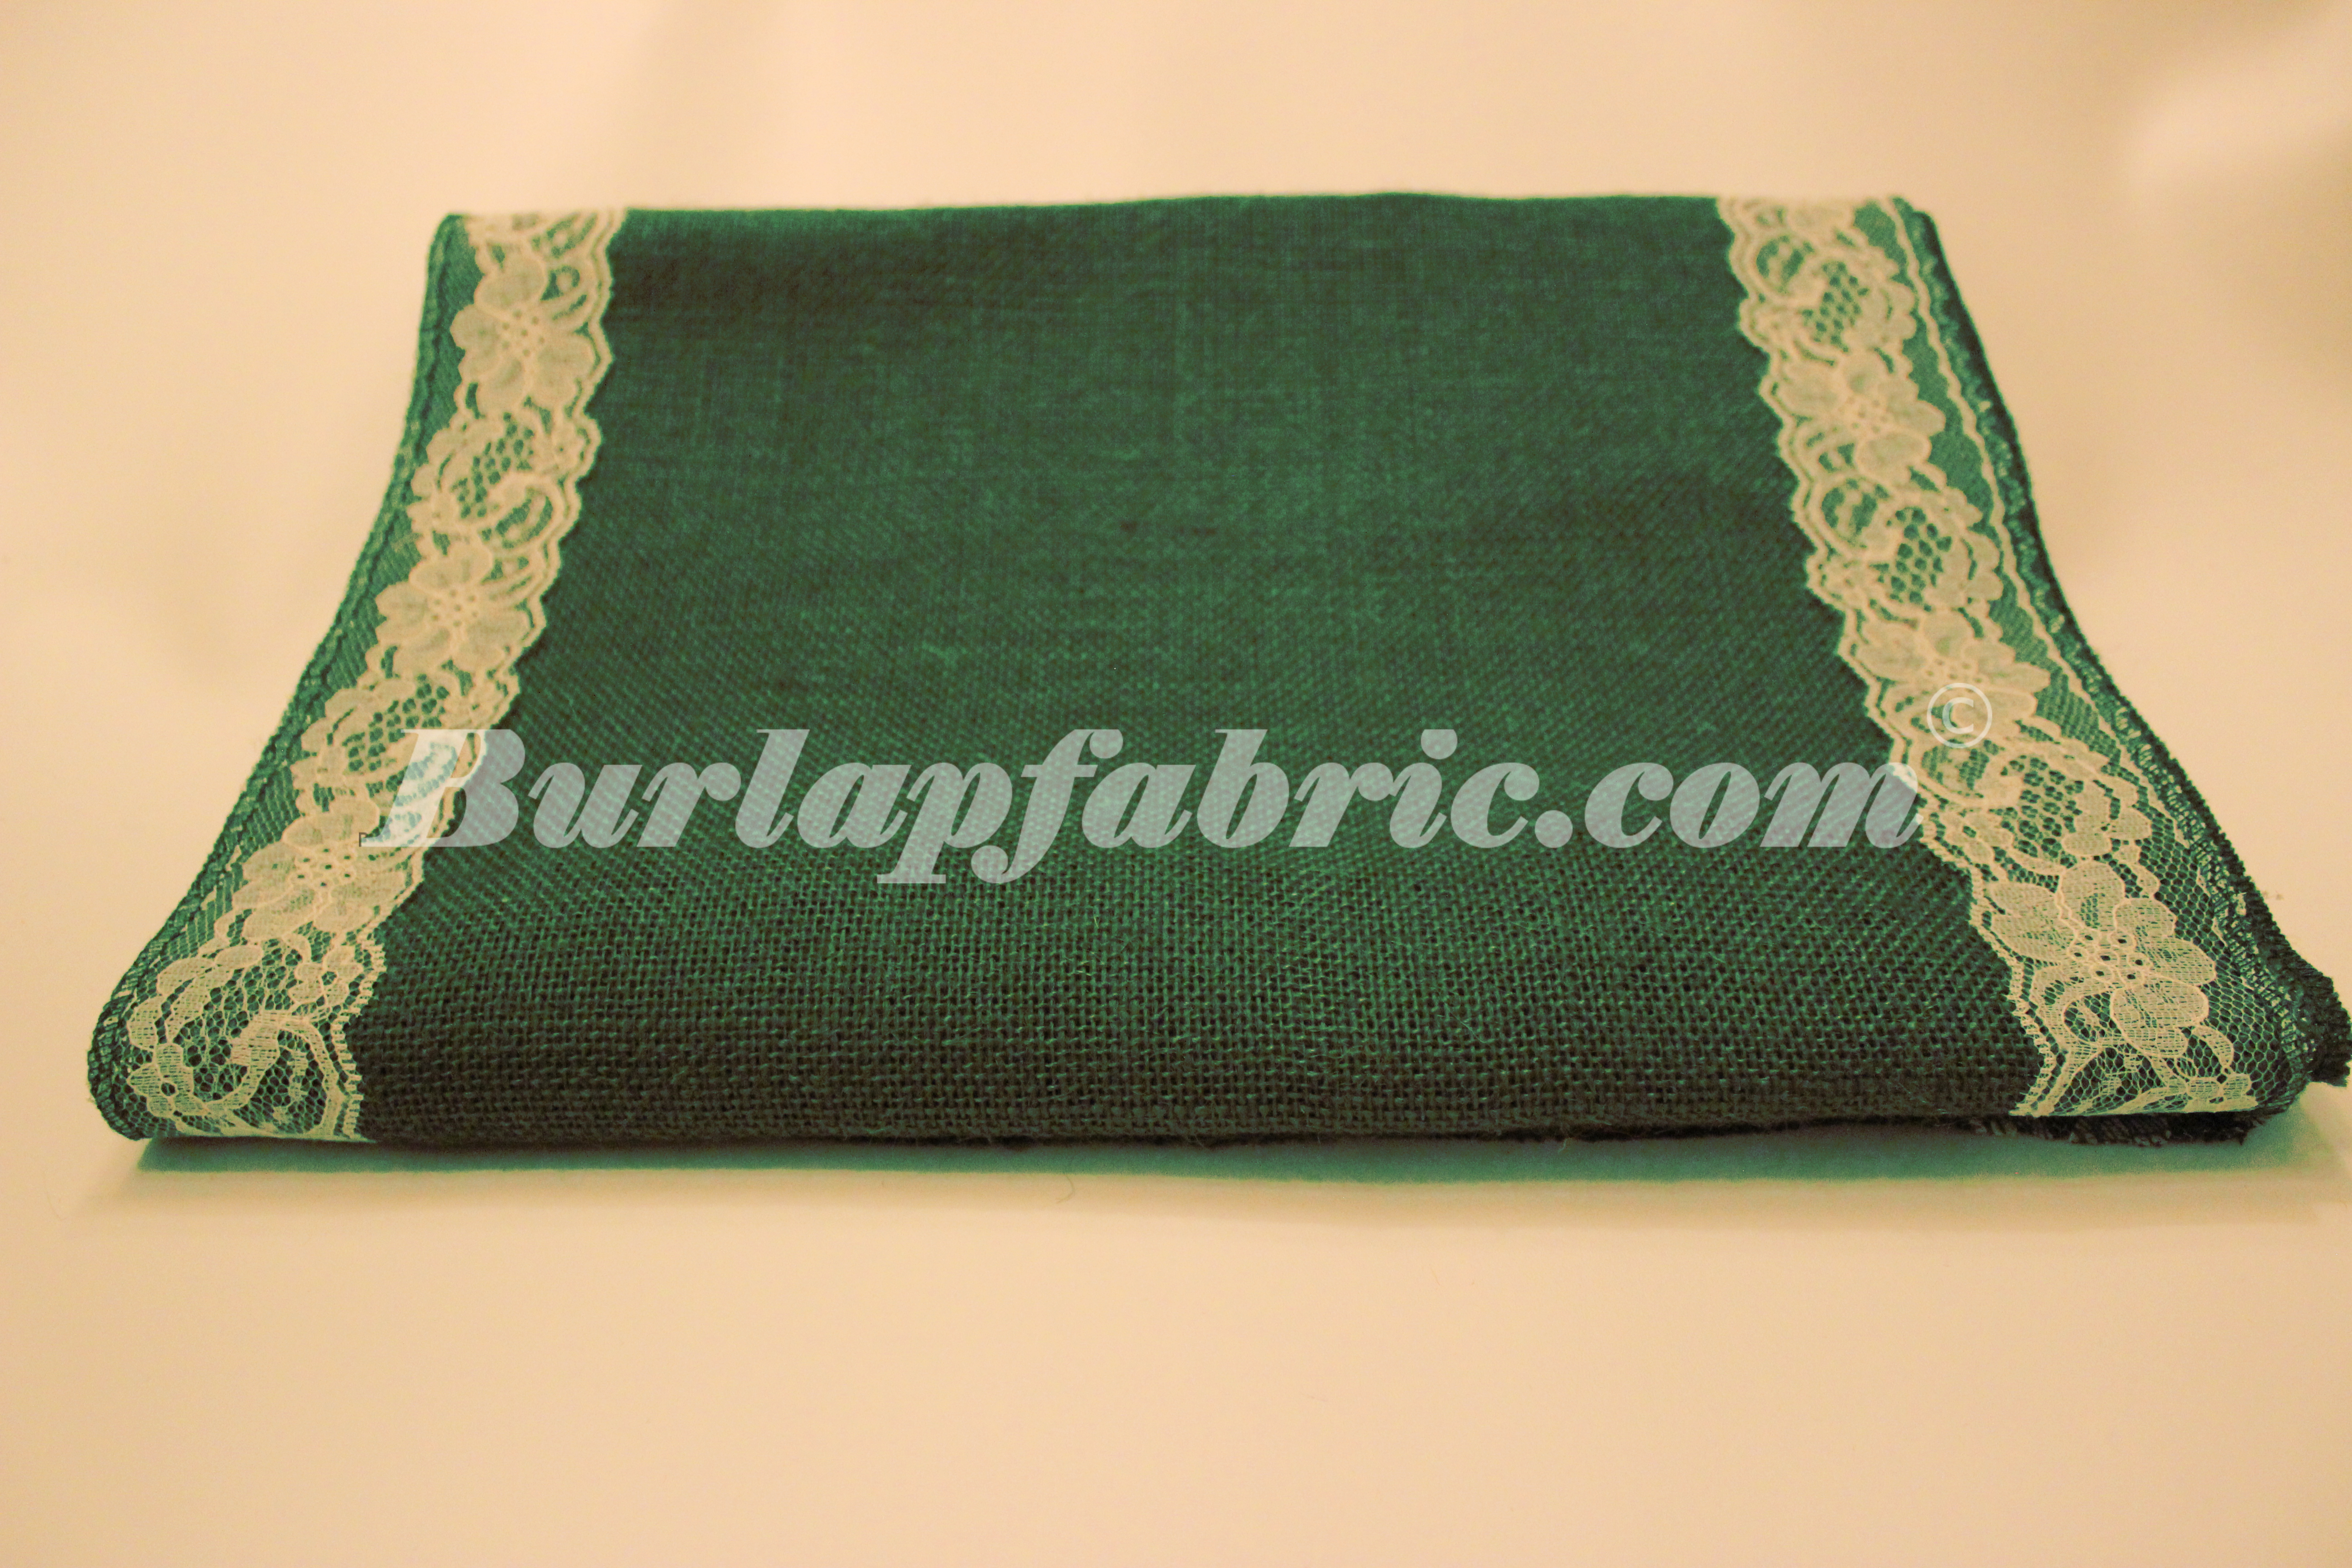 14" Hunter Green Burlap Runner with 2" Ivory Lace Borders